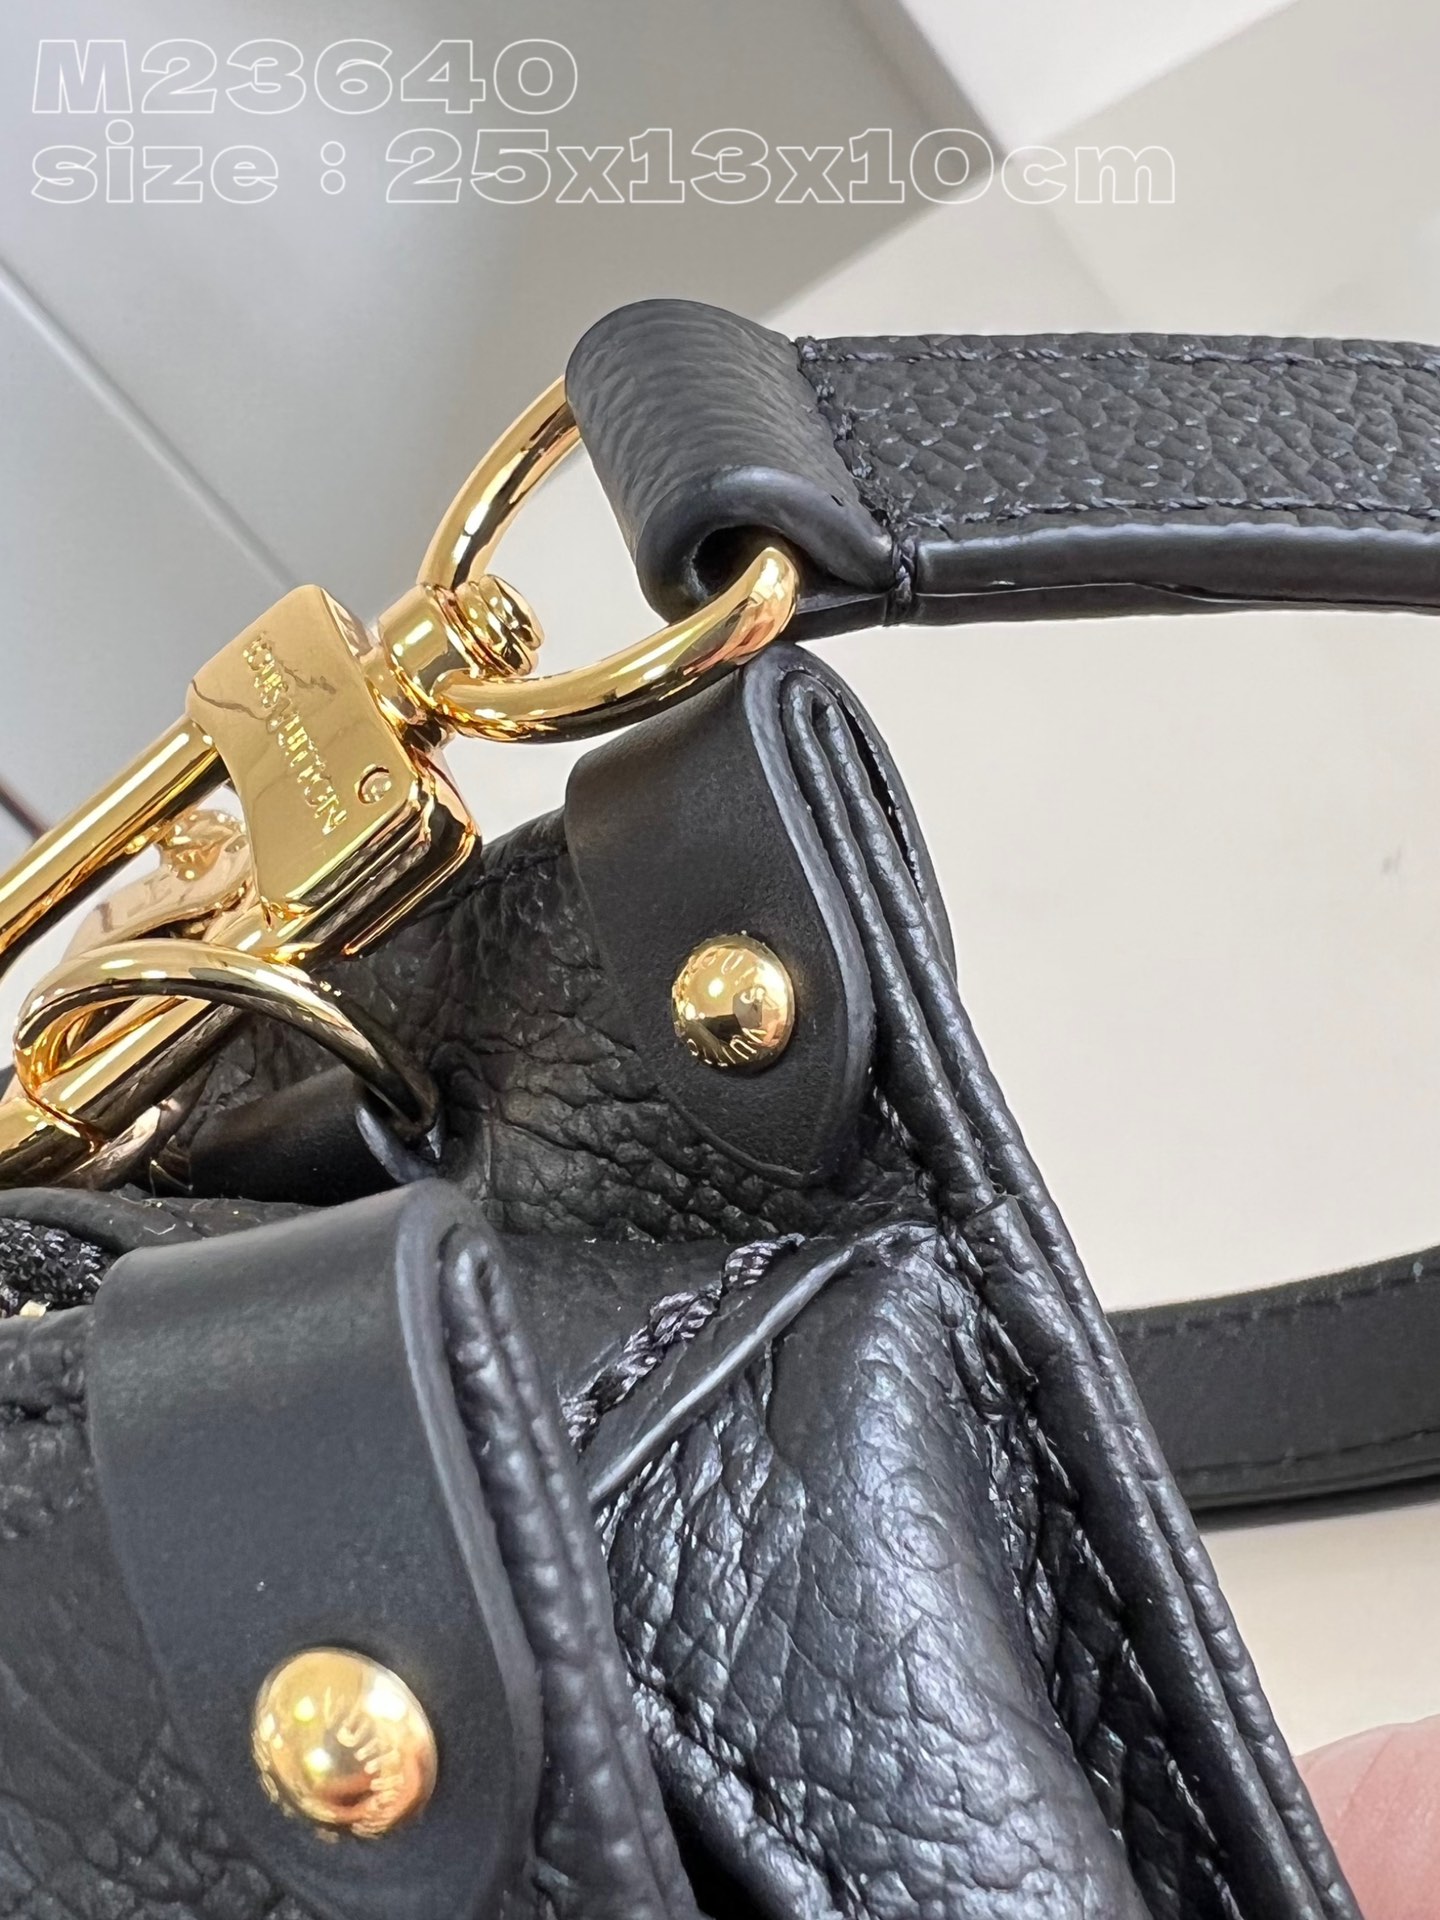 The BEST Louis Vuitton Counter Quality Replica Available Online!